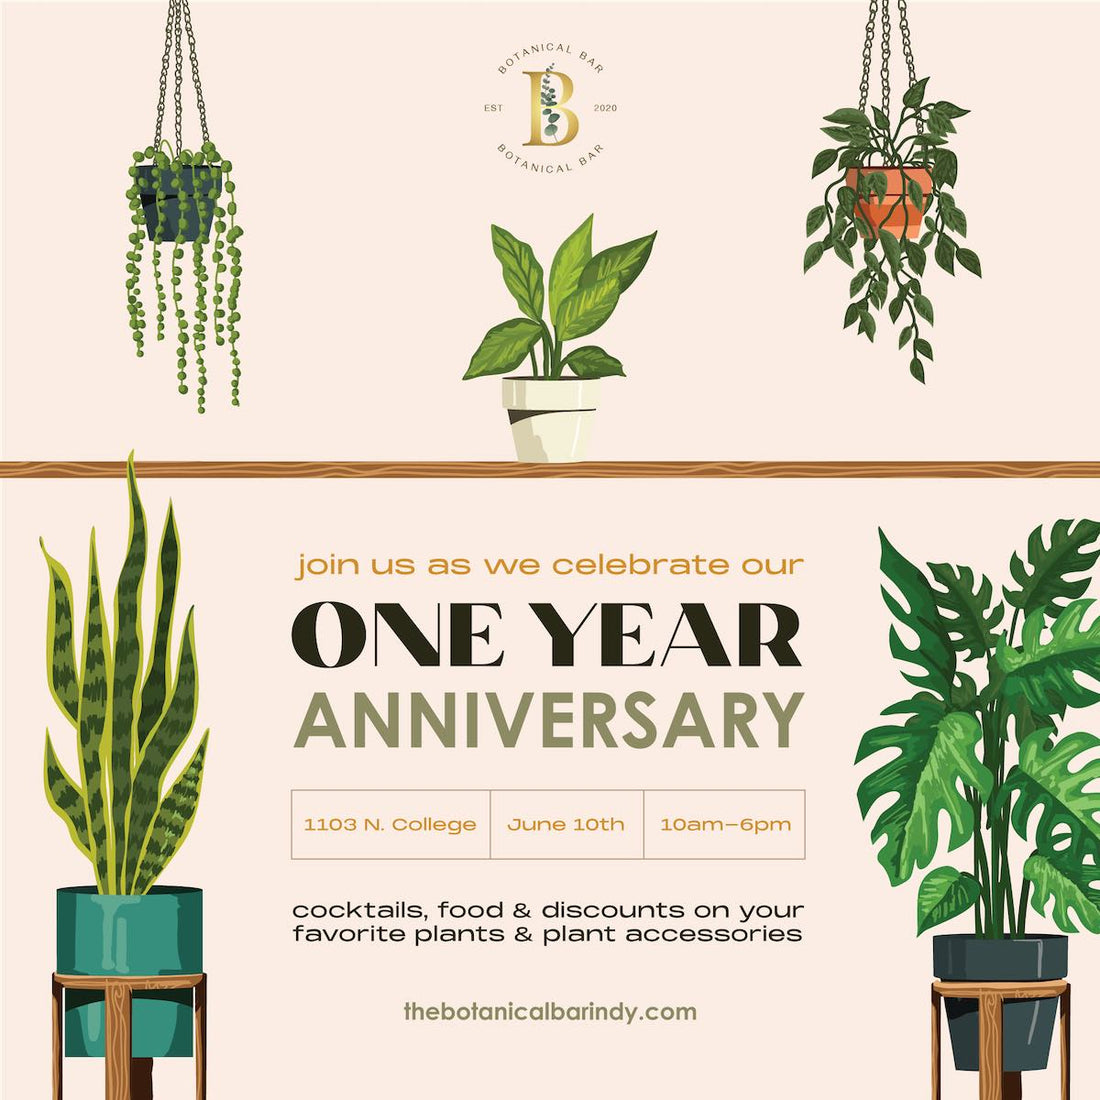 Celebrate our one year anniversary on June 10th